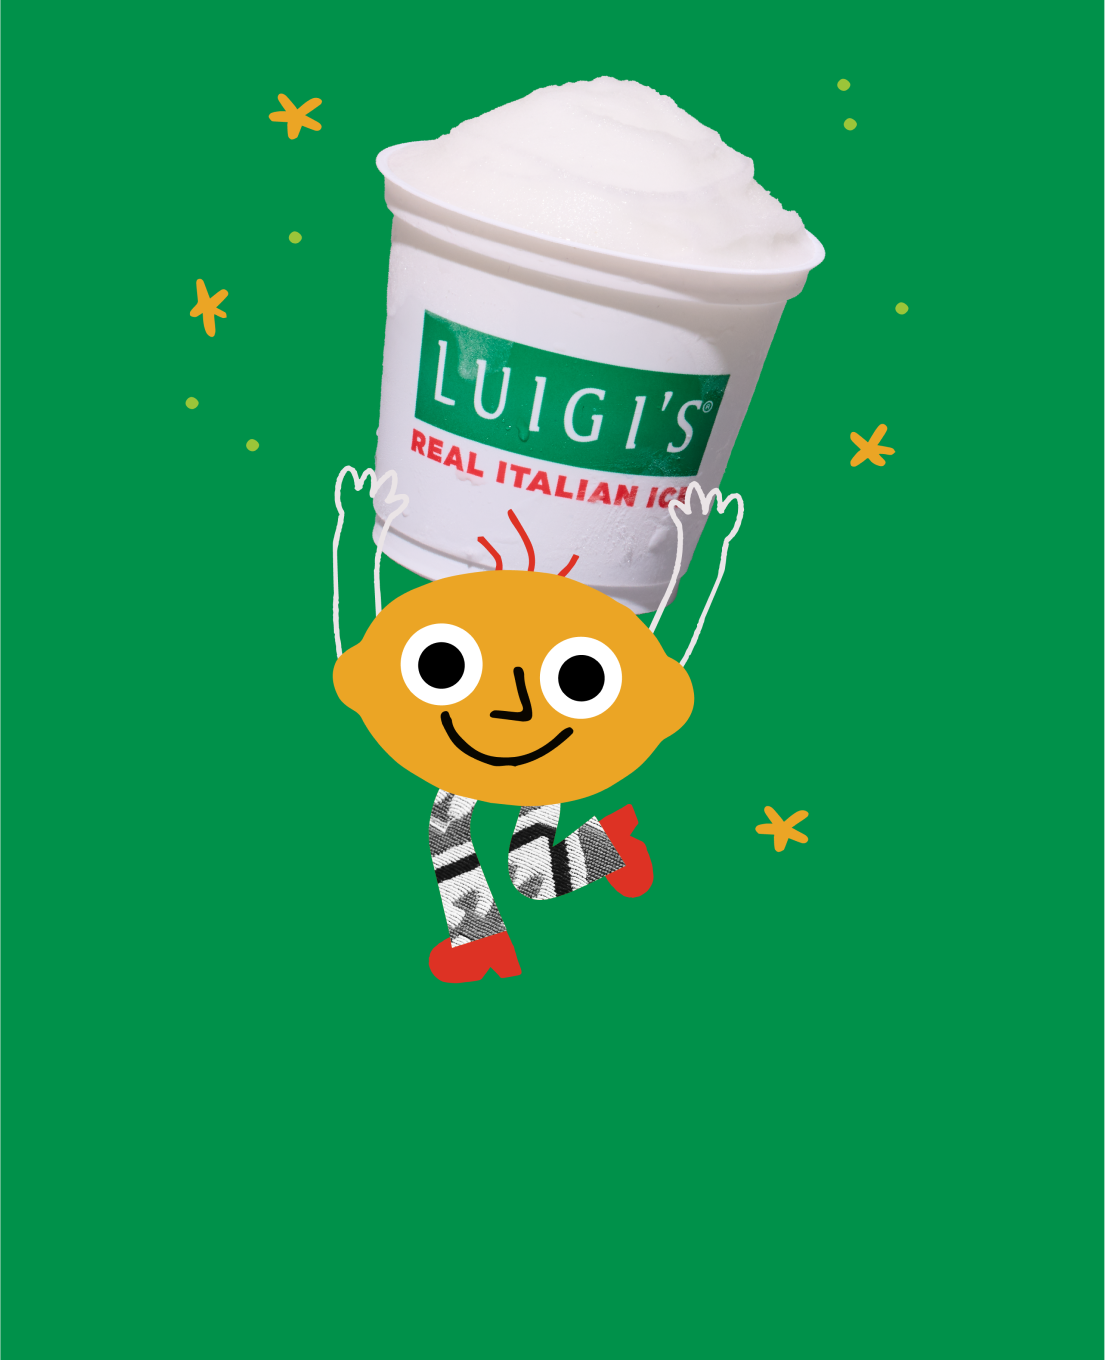 Graphic of cute lemon character holding a LUIGI'S Real Italian Ice cup. The Italian ice is lemon flavored. The Lemon graphic is smiling, has little hairs, and is wearing pants and red shoes. There are little stars around the image.